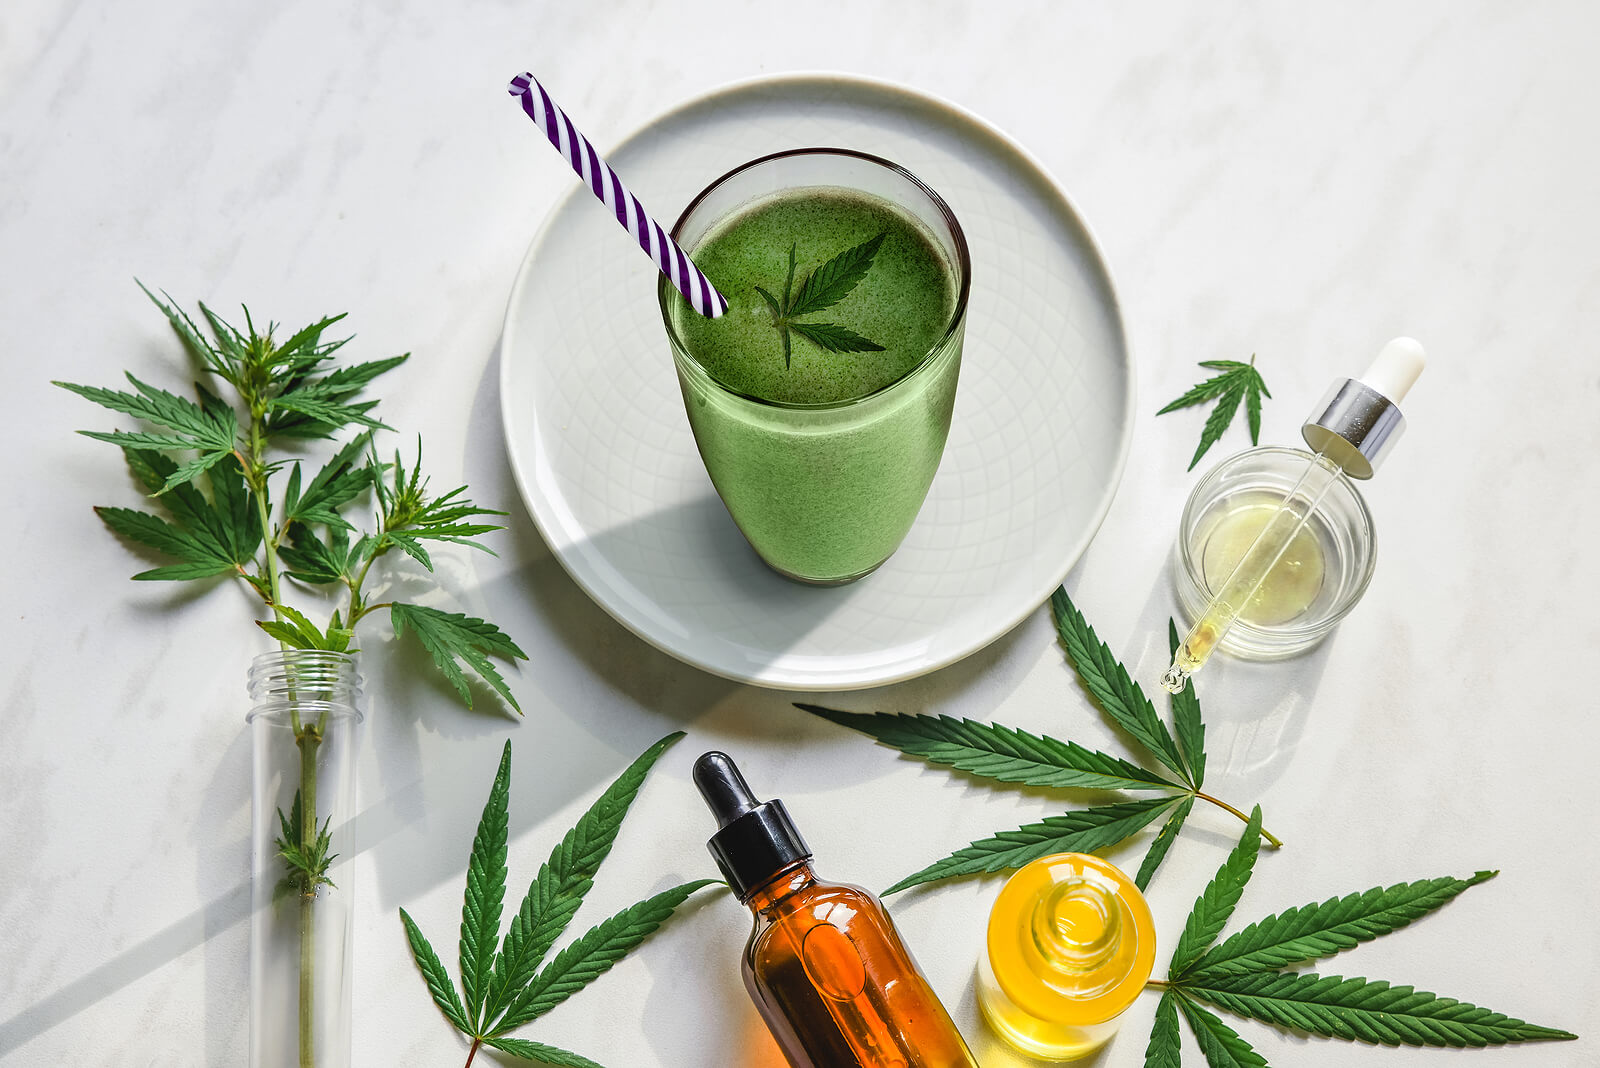 Superfood cannabis pic | Entertainment